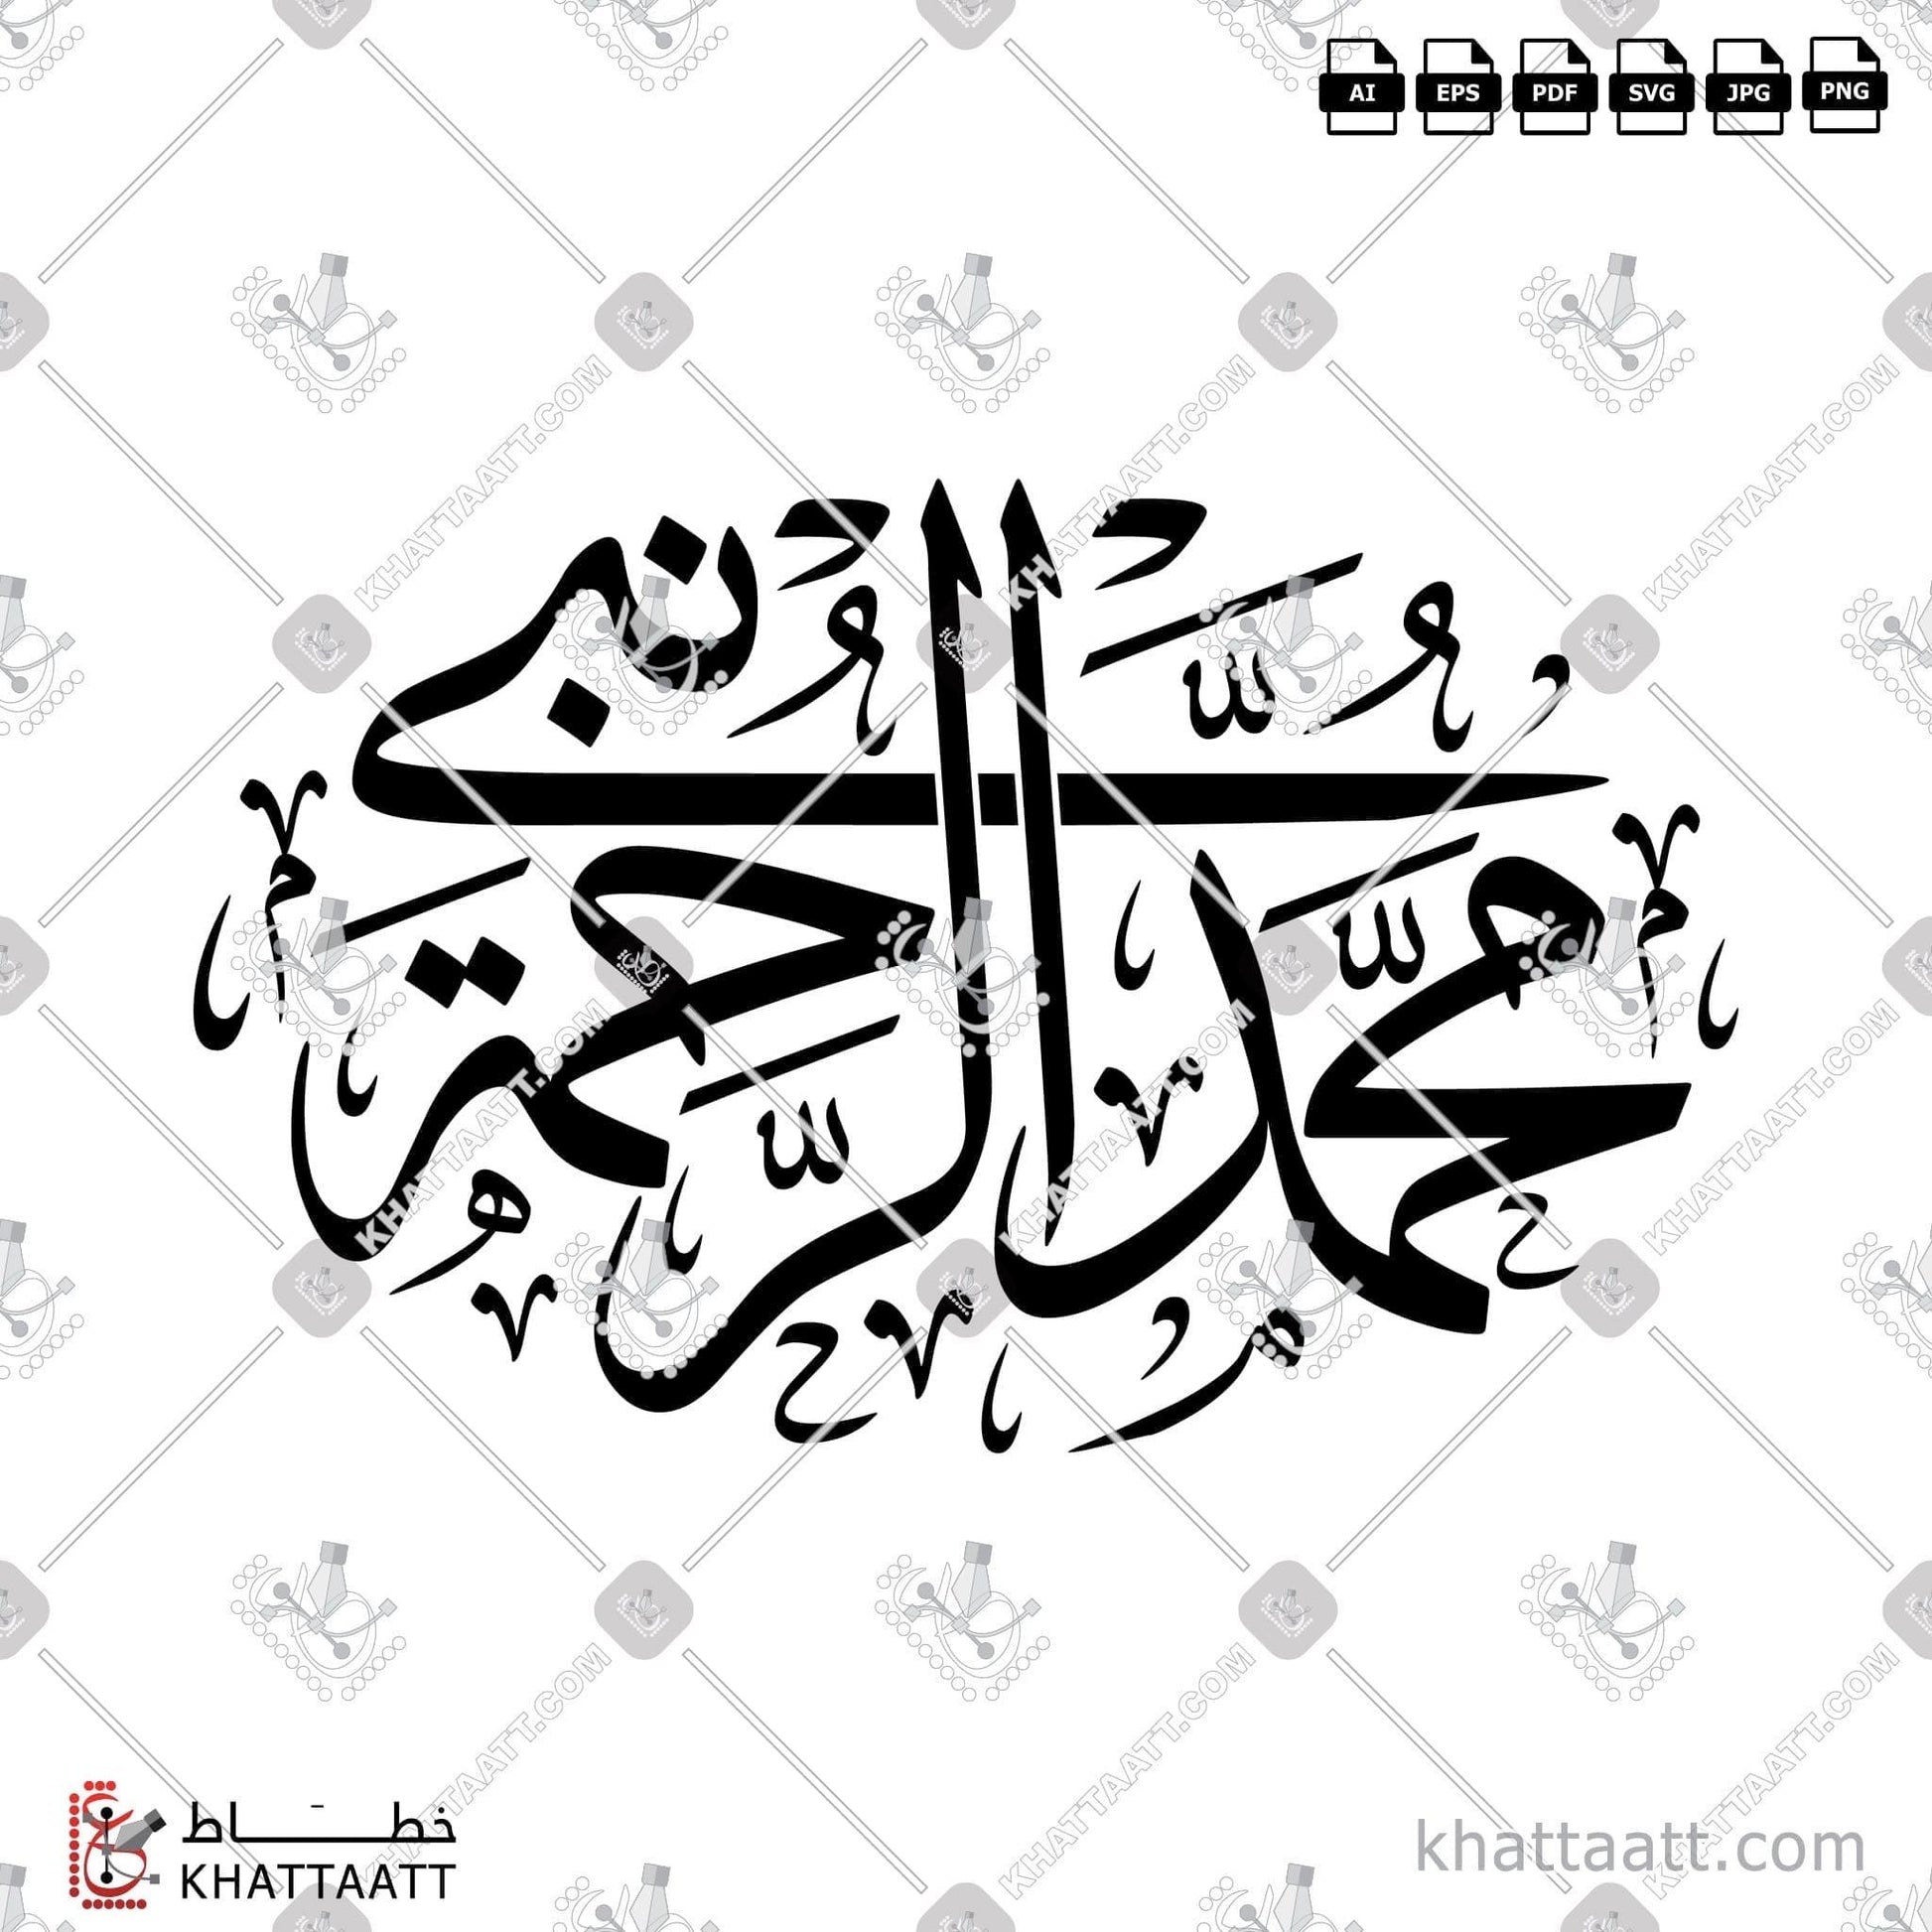 Download Arabic Calligraphy of محمد نبي الرحمة ﷺ in Thuluth - خط الثلث in vector and .png